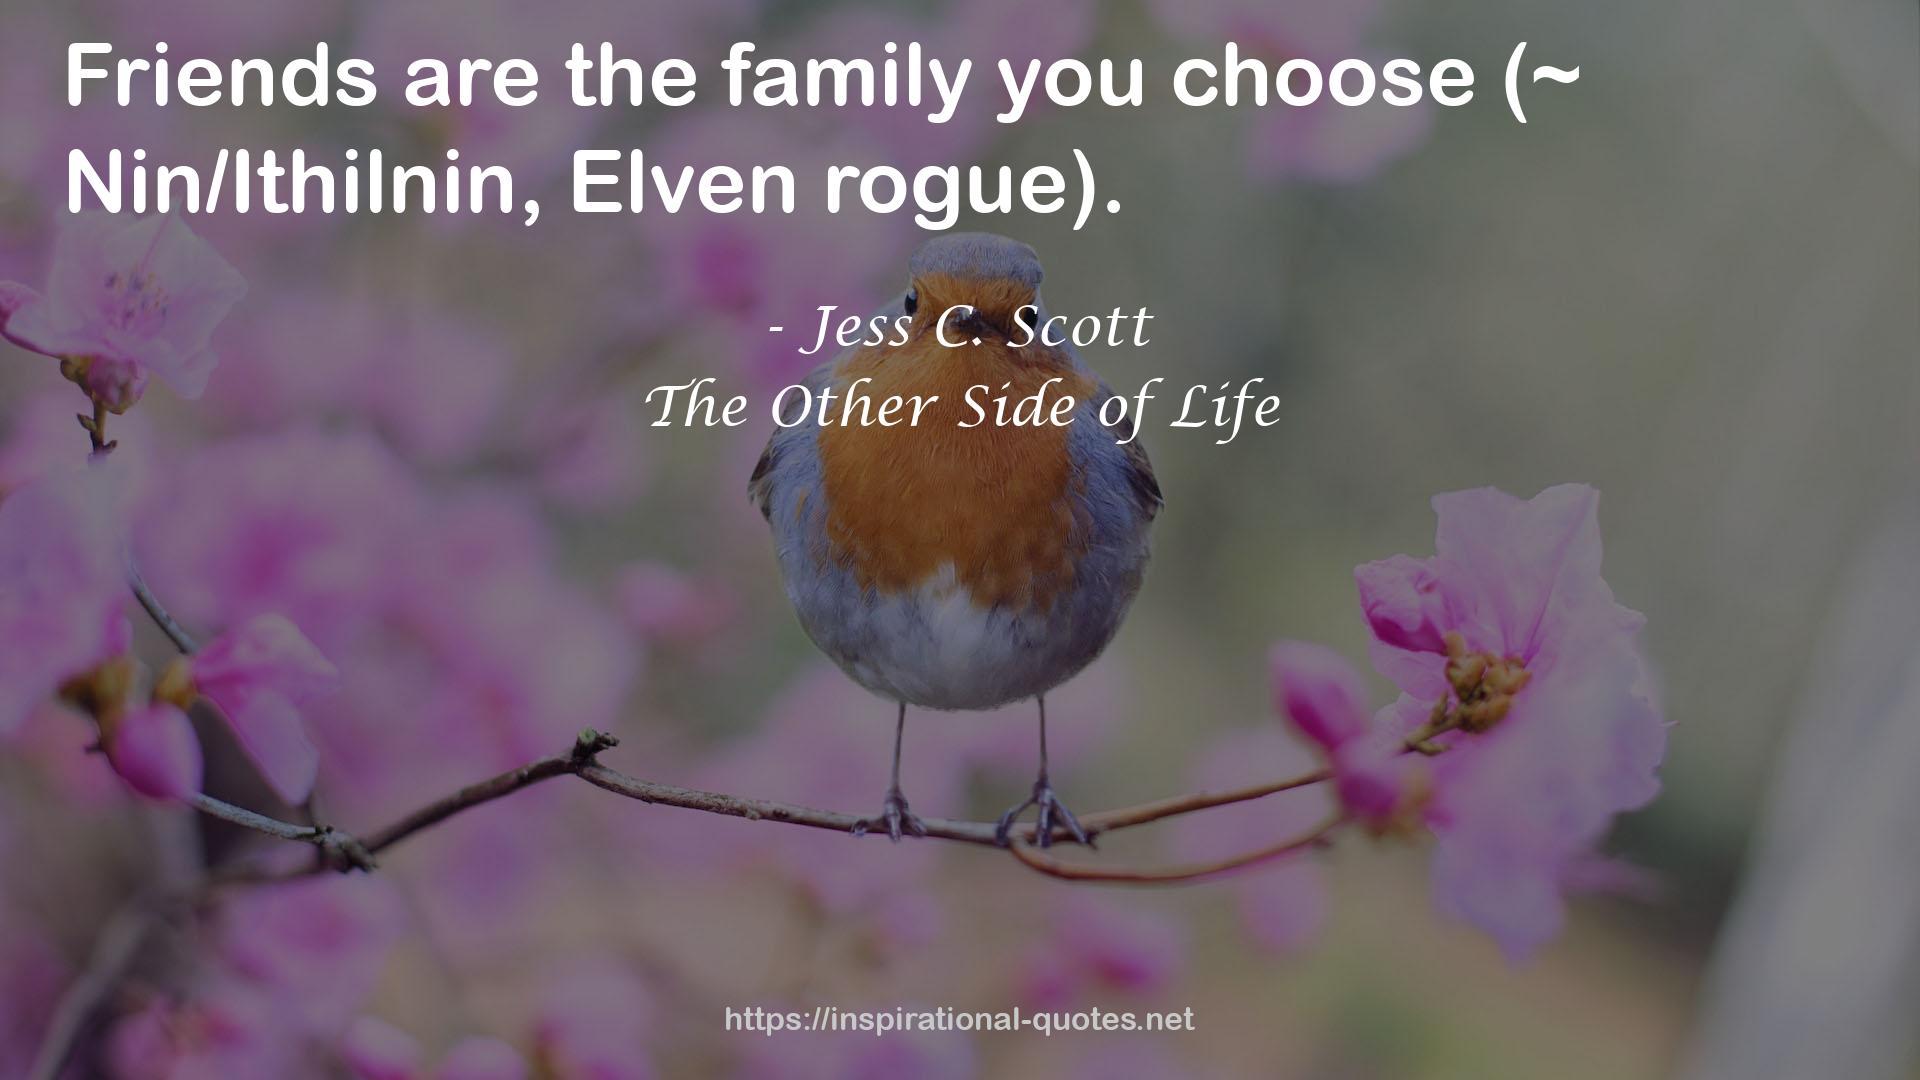 The Other Side of Life QUOTES